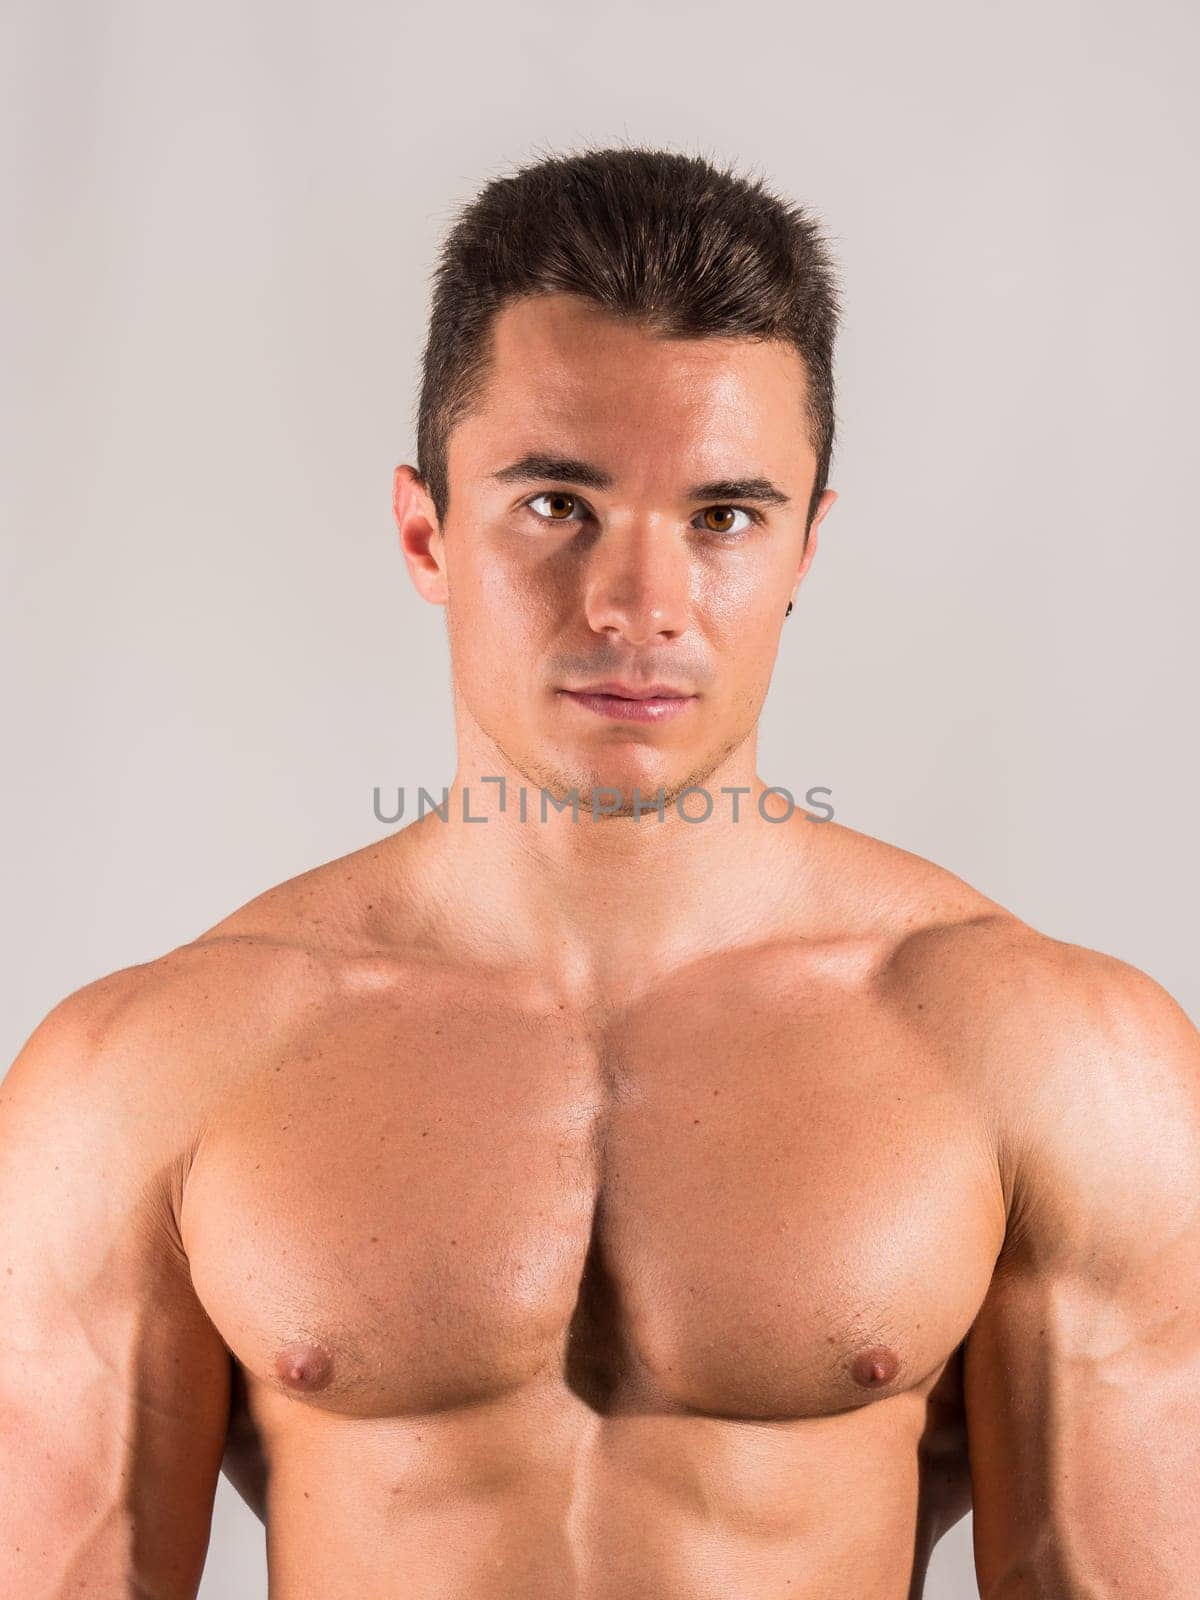 Shirtless young male bodybuilder in studio portrait by artofphoto